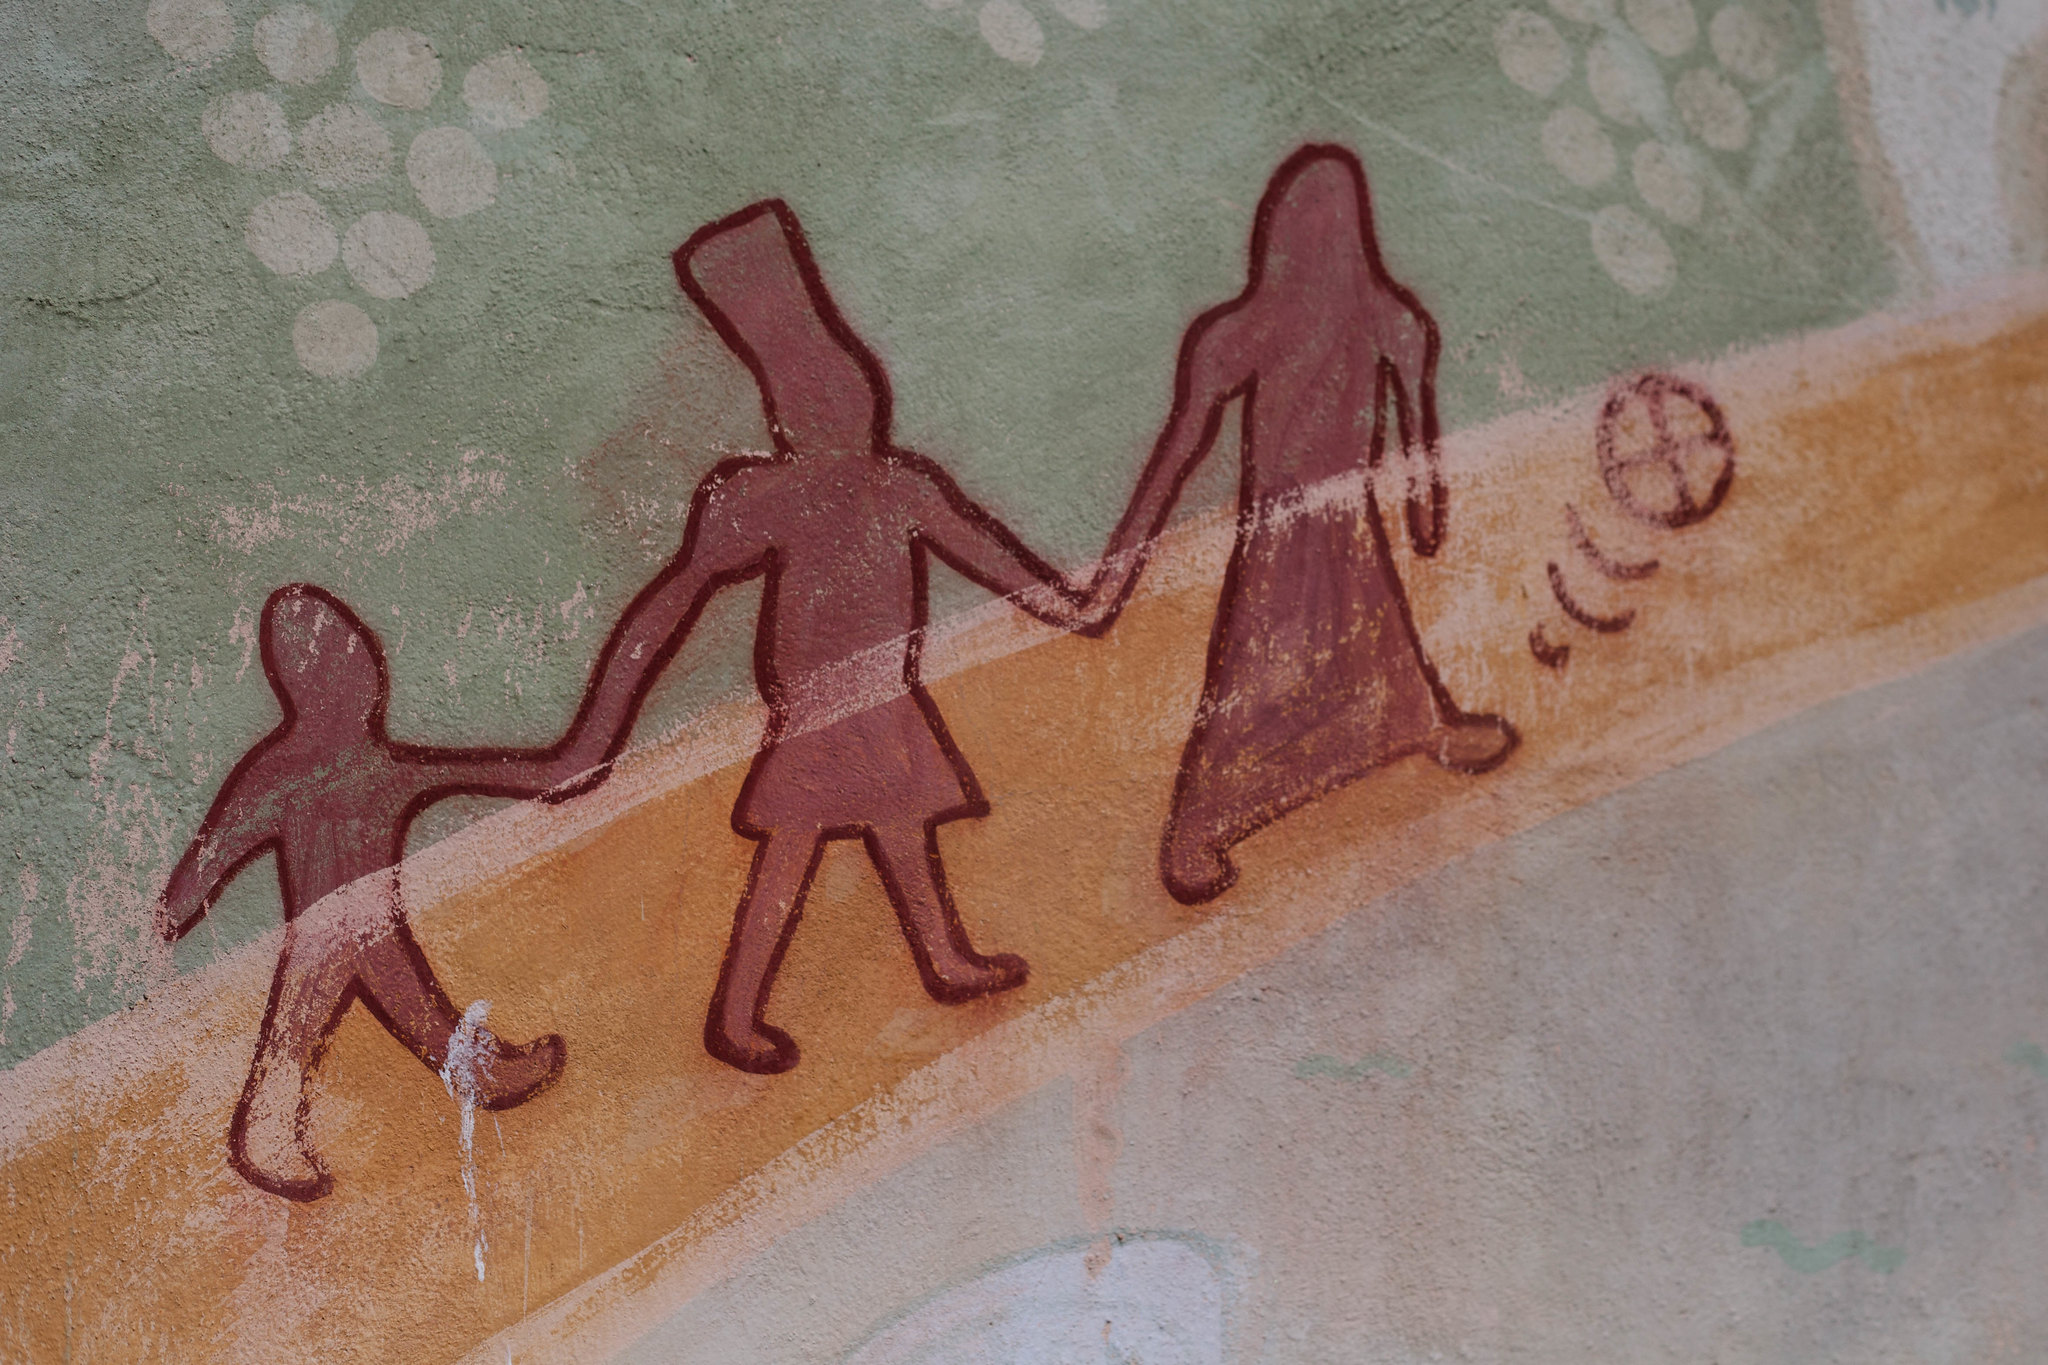 Detail from a mural in Turku.